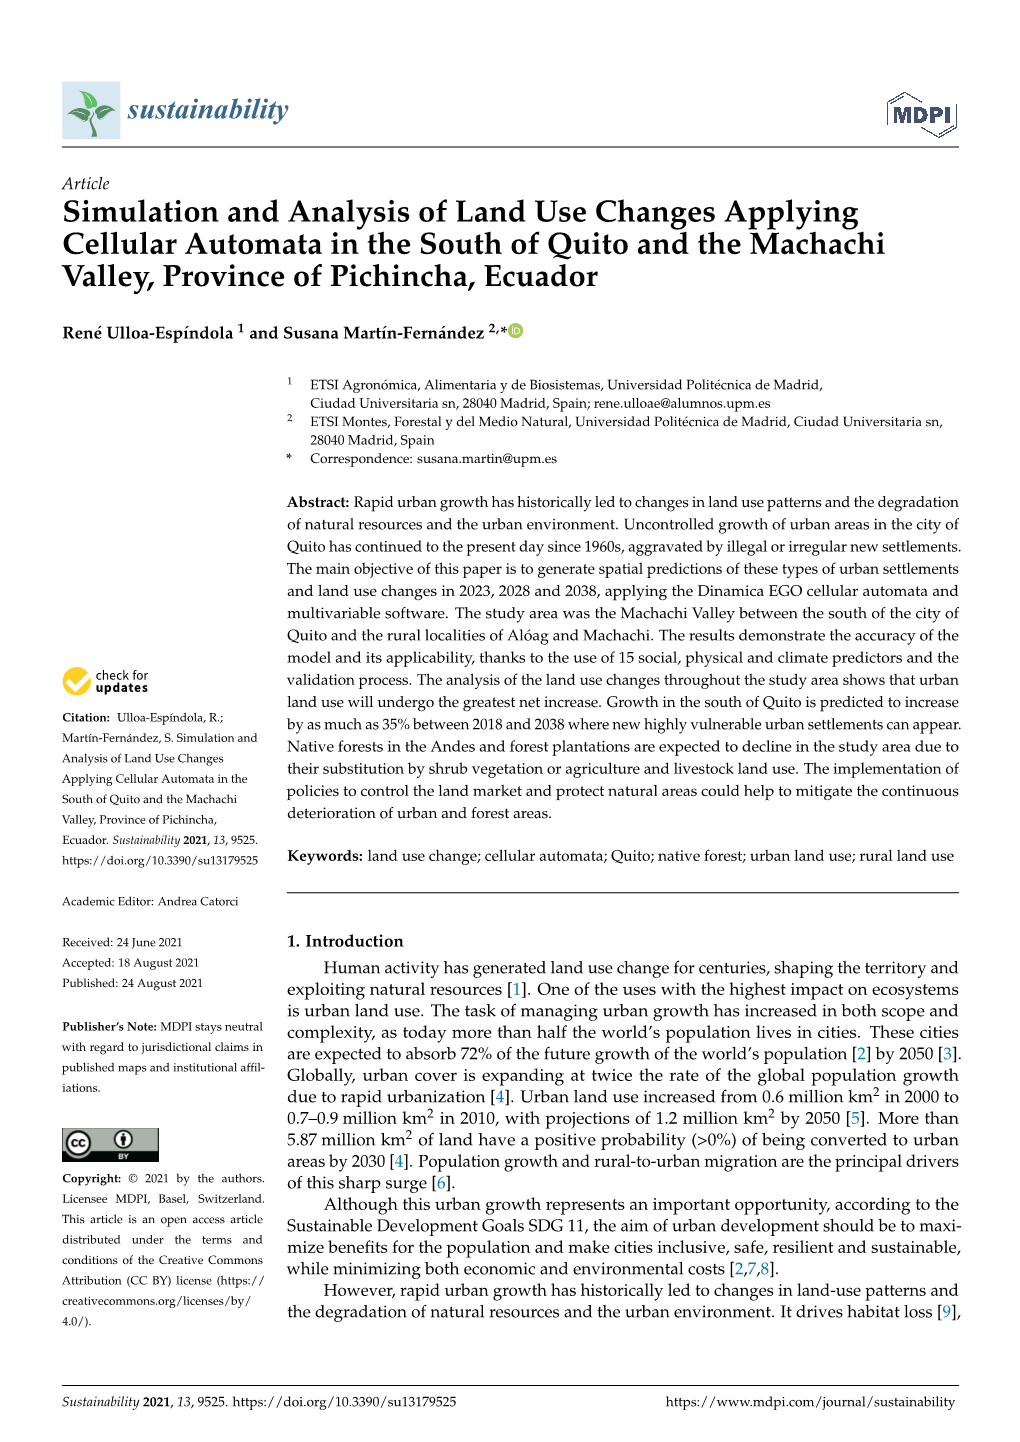 Simulation and Analysis of Land Use Changes Applying Cellular Automata in the South of Quito and the Machachi Valley, Province of Pichincha, Ecuador